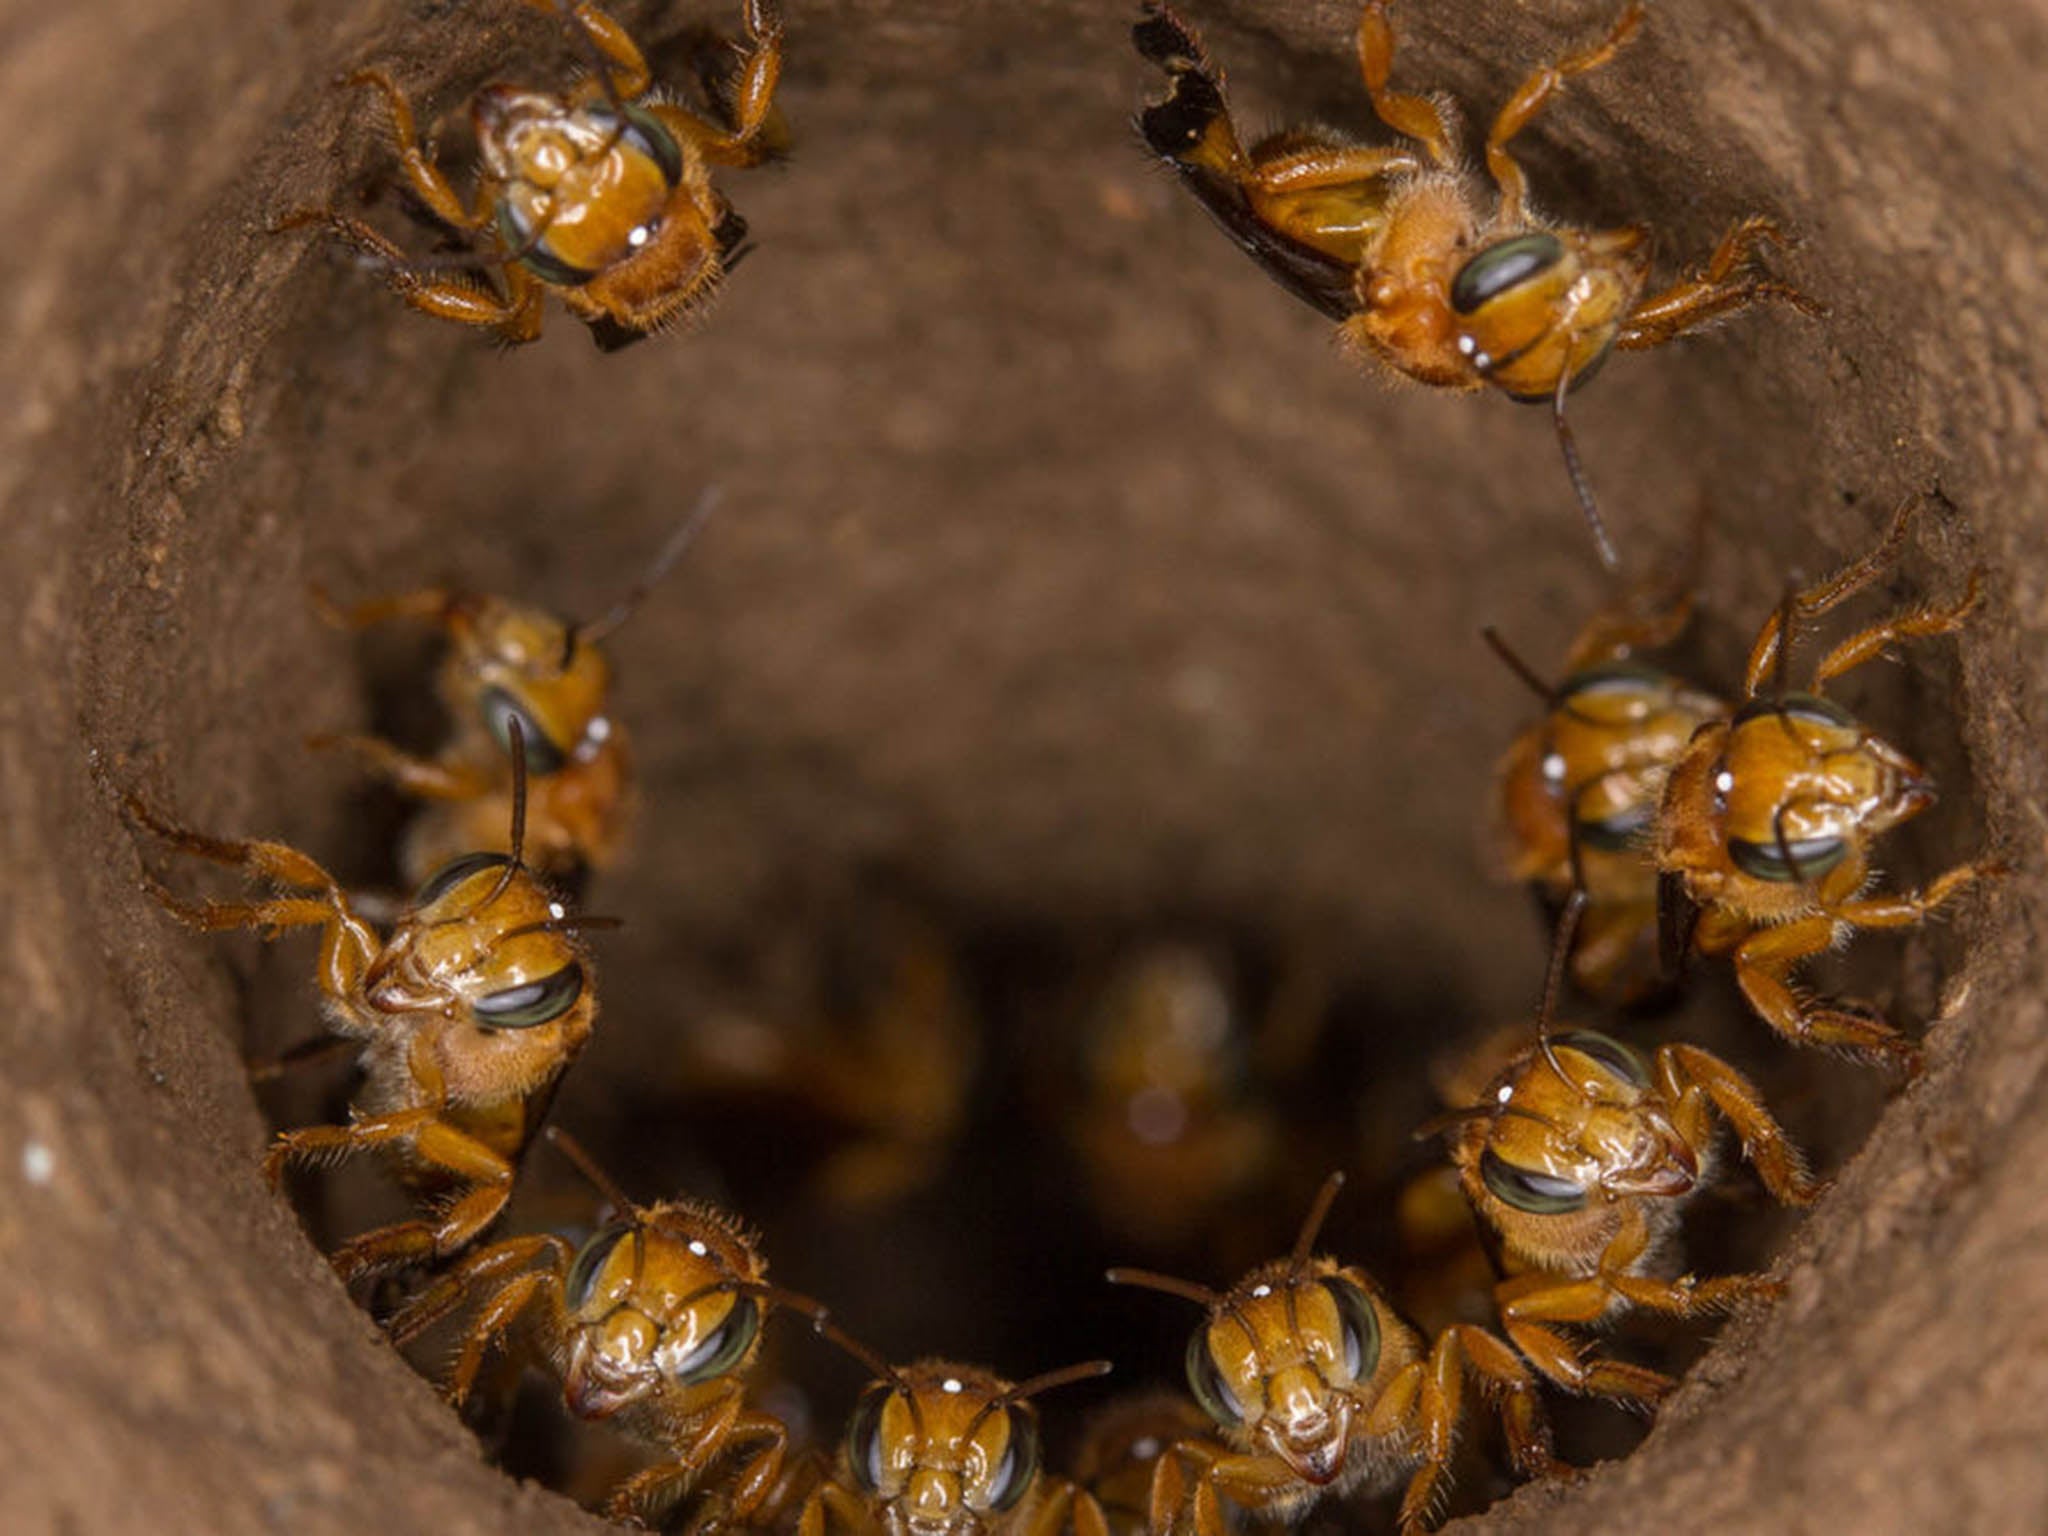 You shall not pass: Scaptotrigona workers defend the entrance to their nest – but they could just as easily turn on their own queen